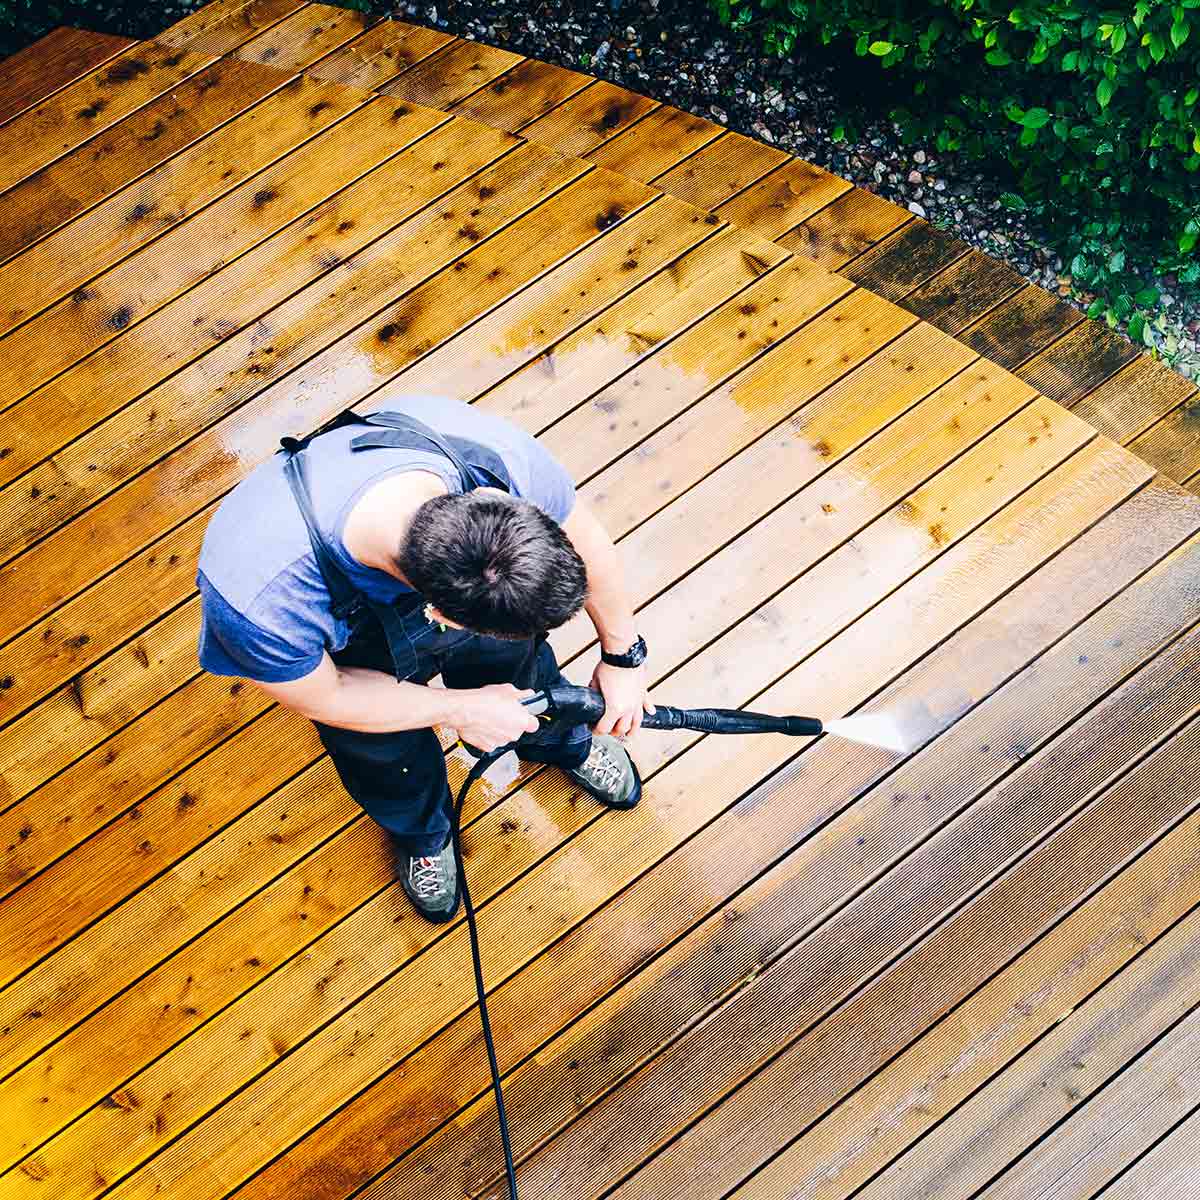 Power Washing Deck and Patio Cleaning Services from NC Paint and PowerWash